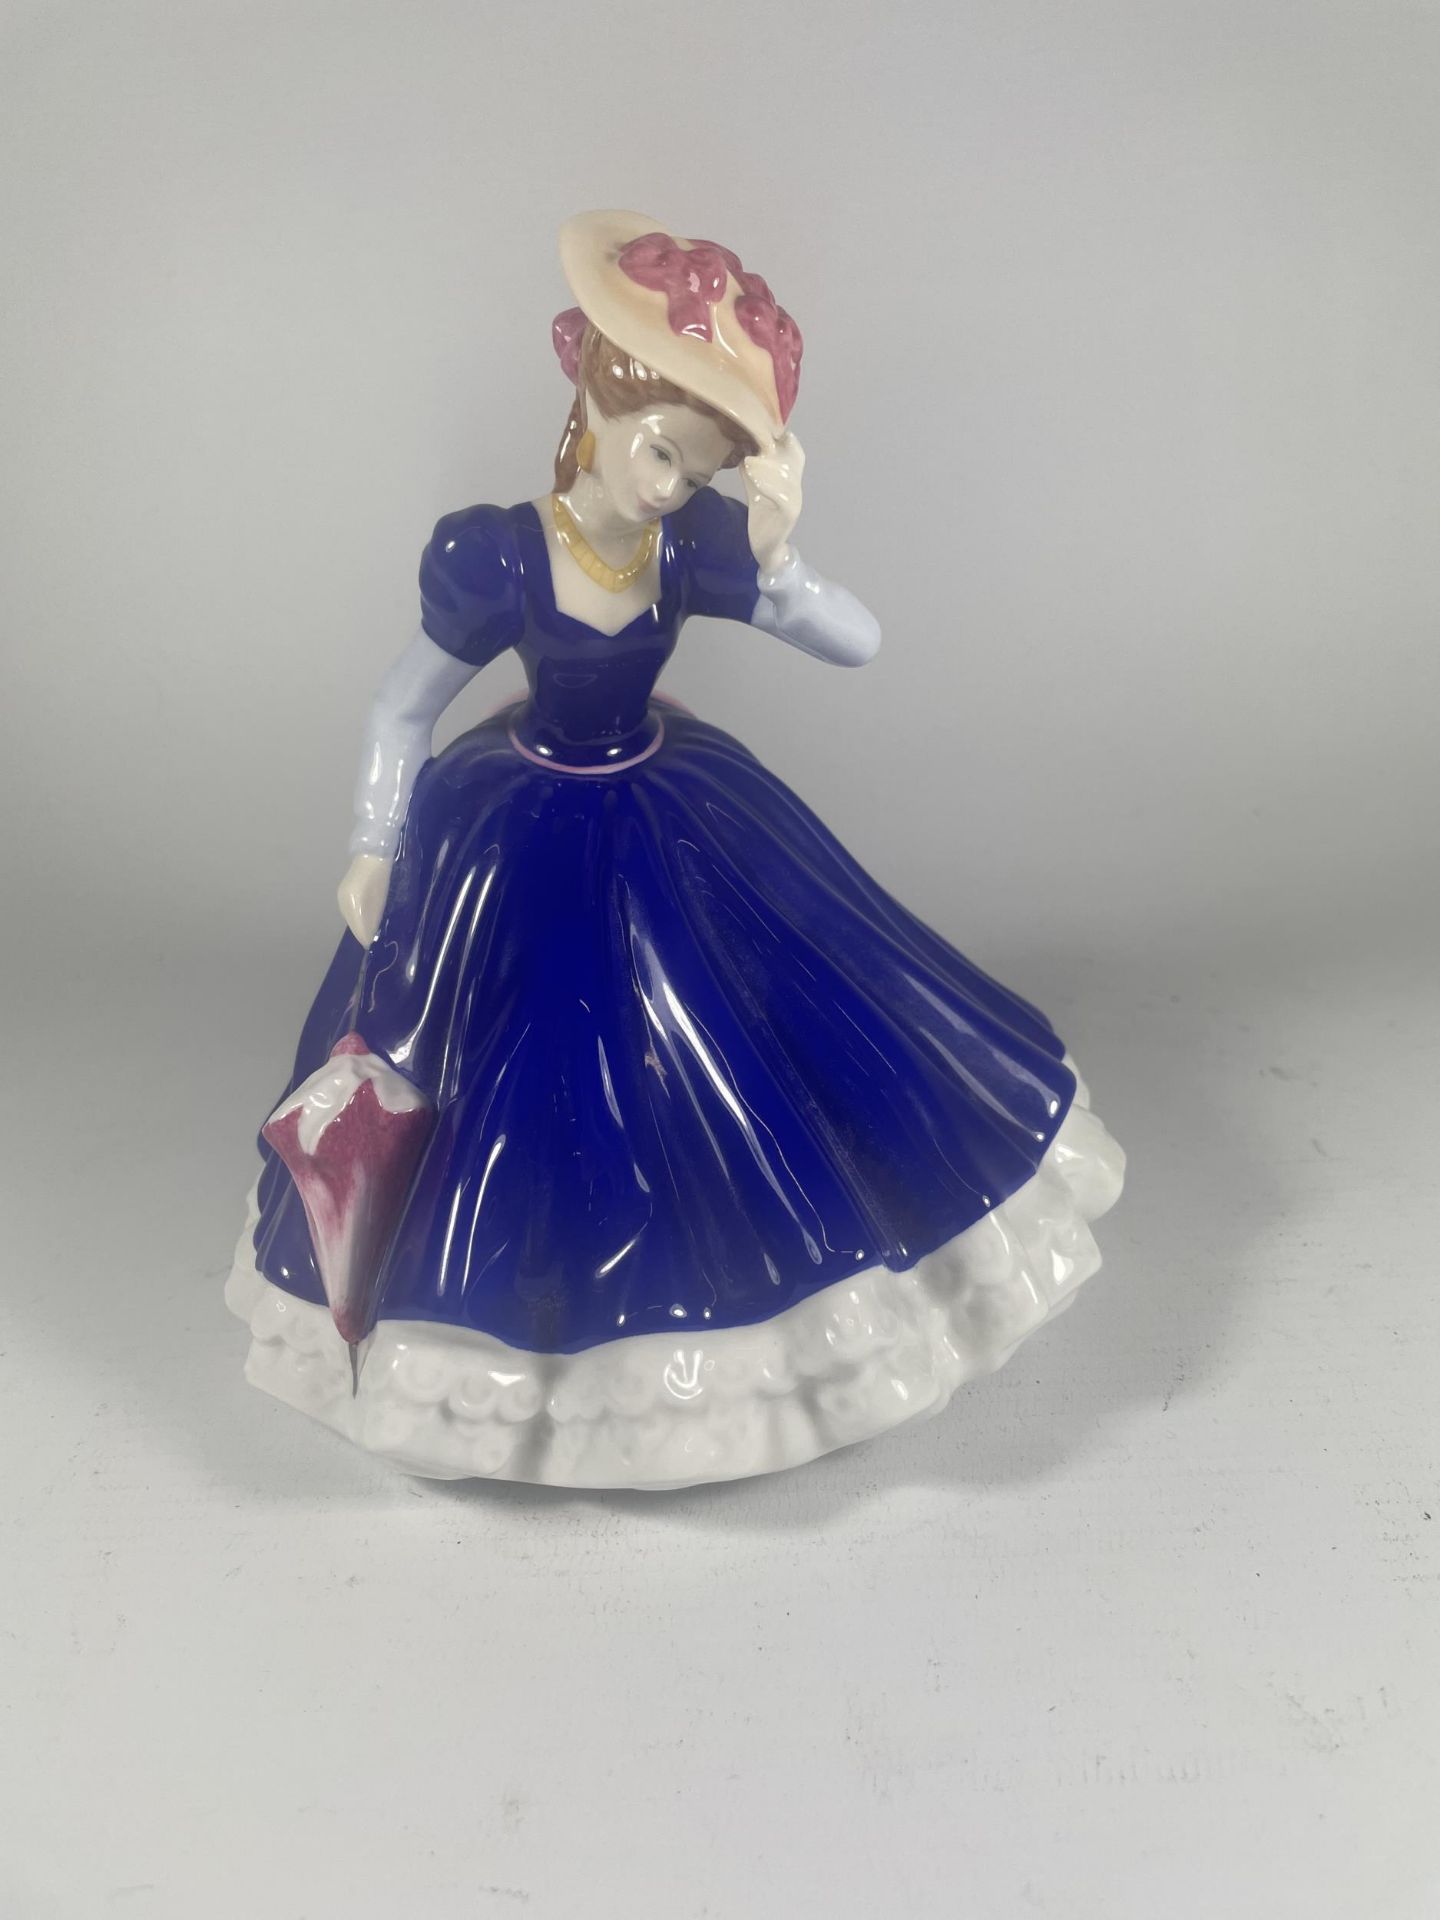 A ROYAL DOULTON FIGURE OF THE YEAR 2006 MARY FIGURE